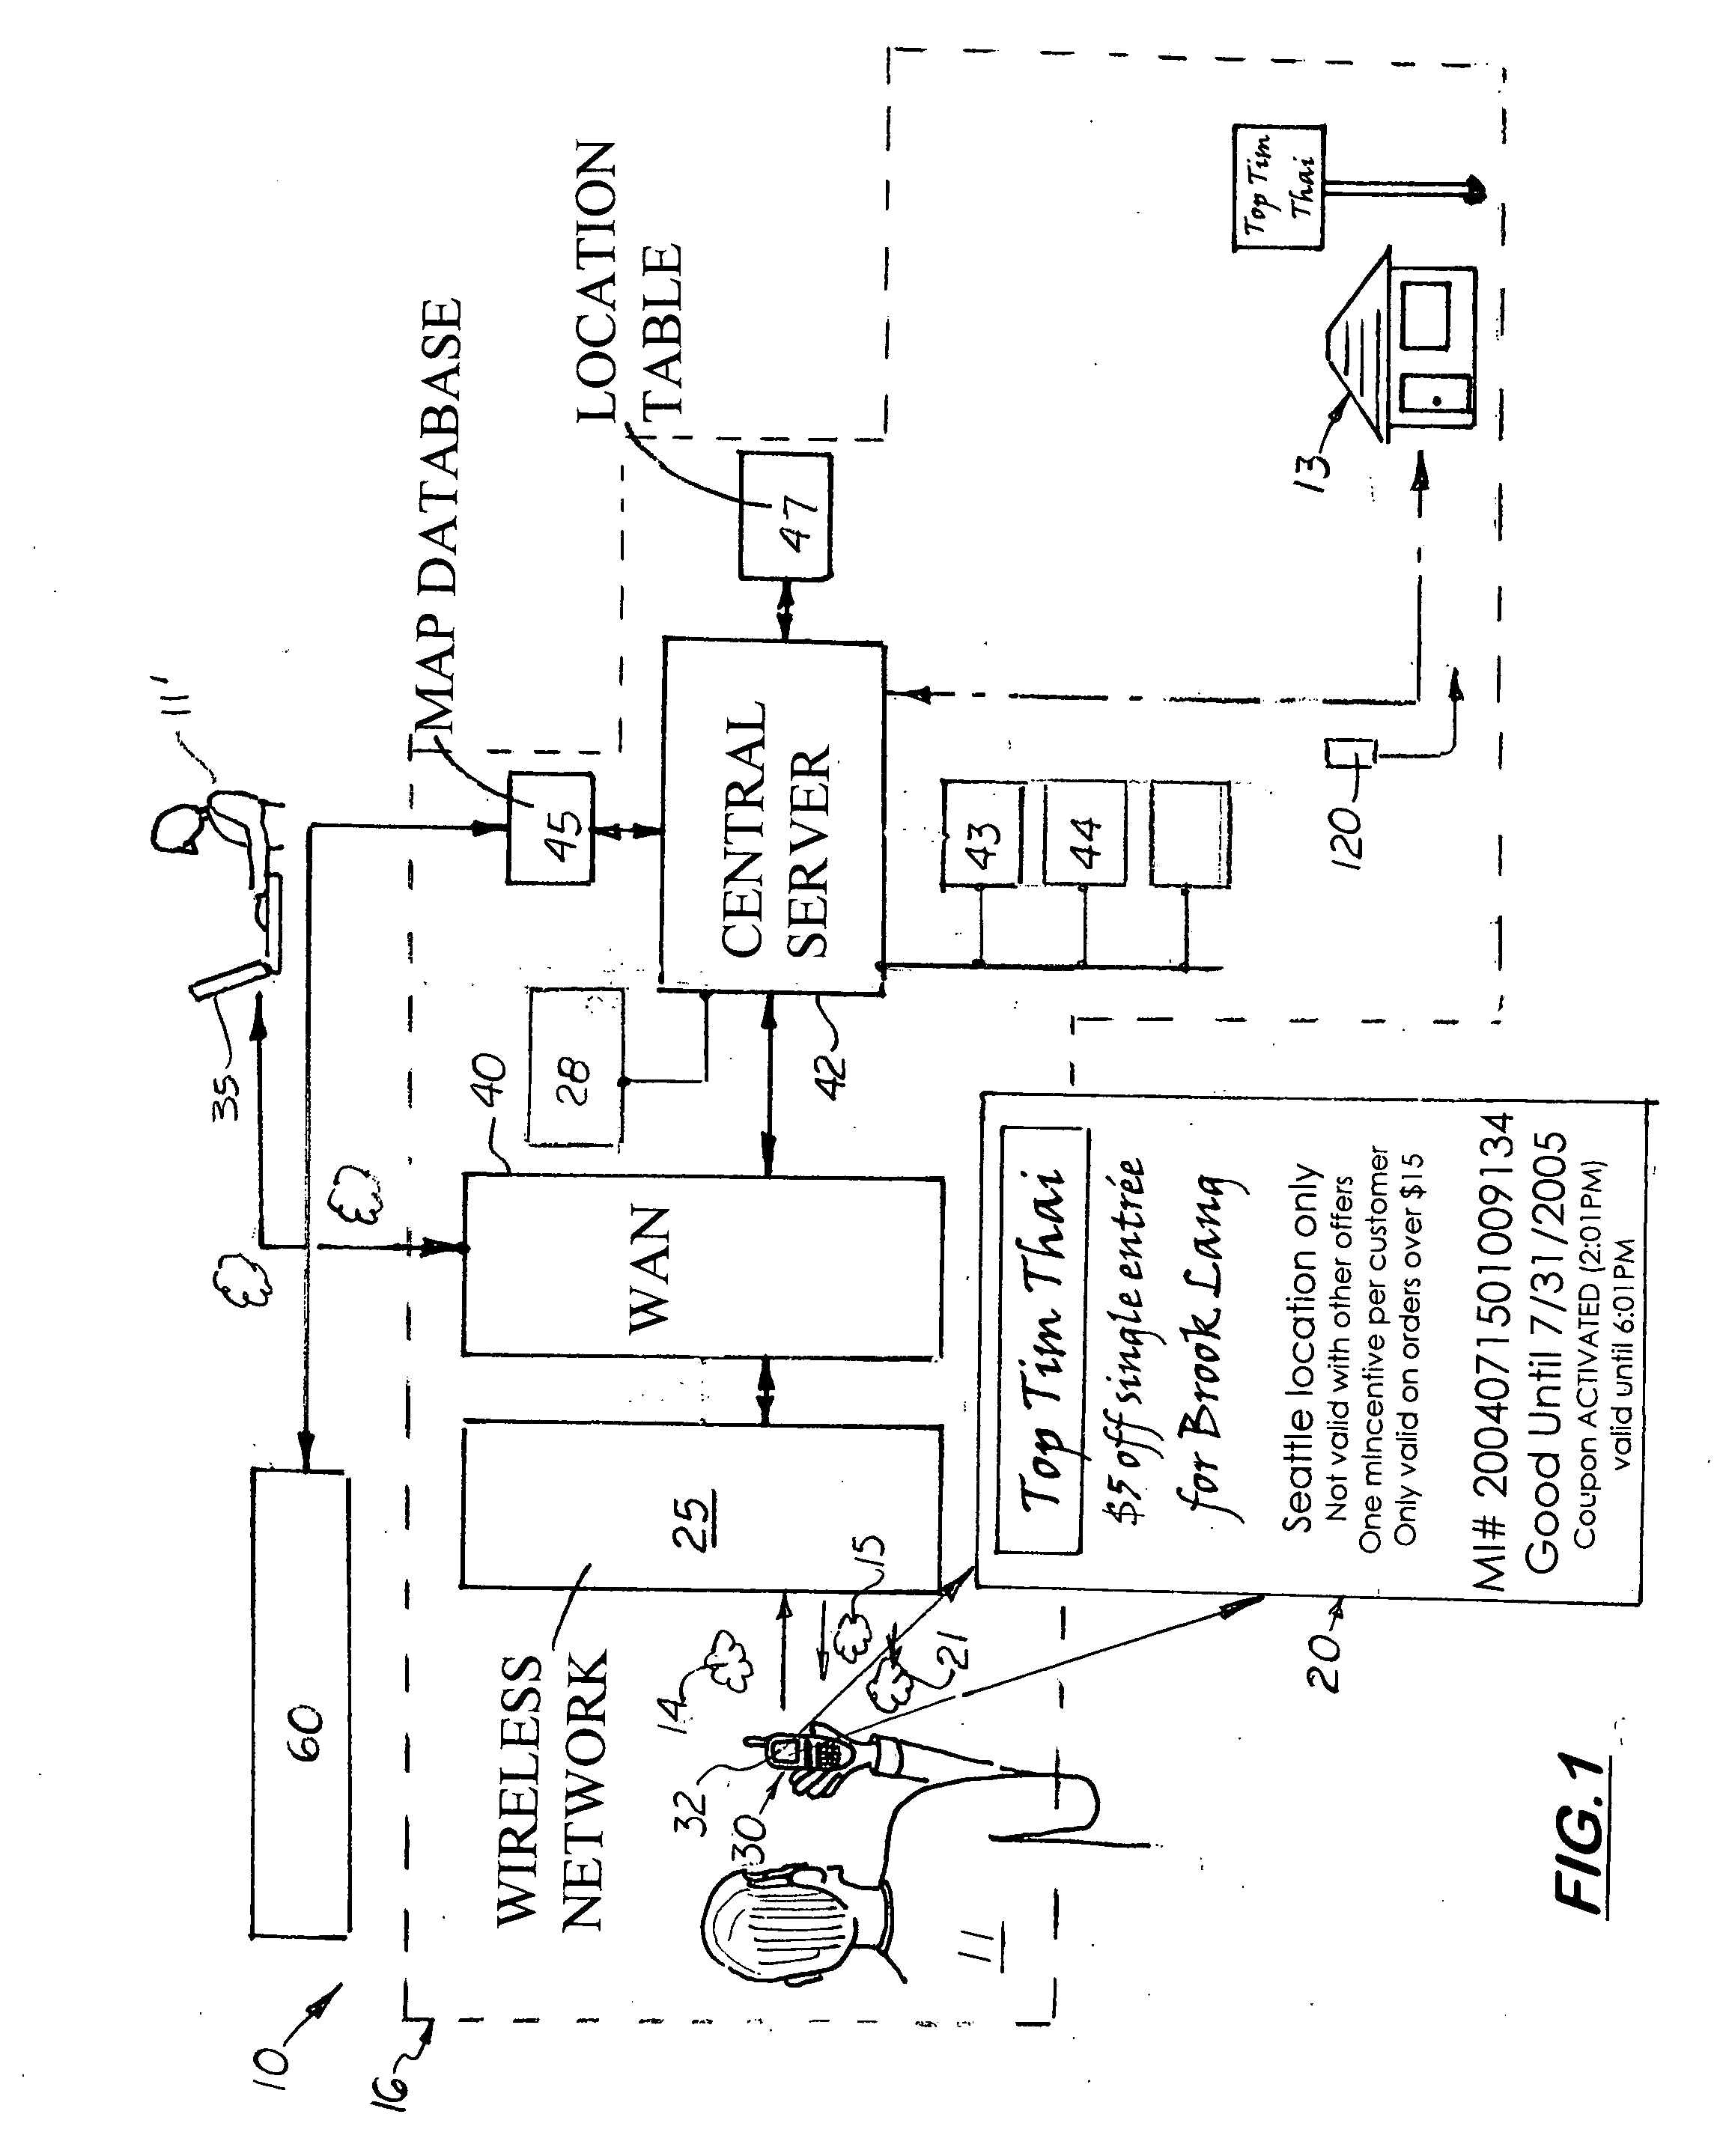 Method and distribution system for location based wireless presentation of electronic coupons